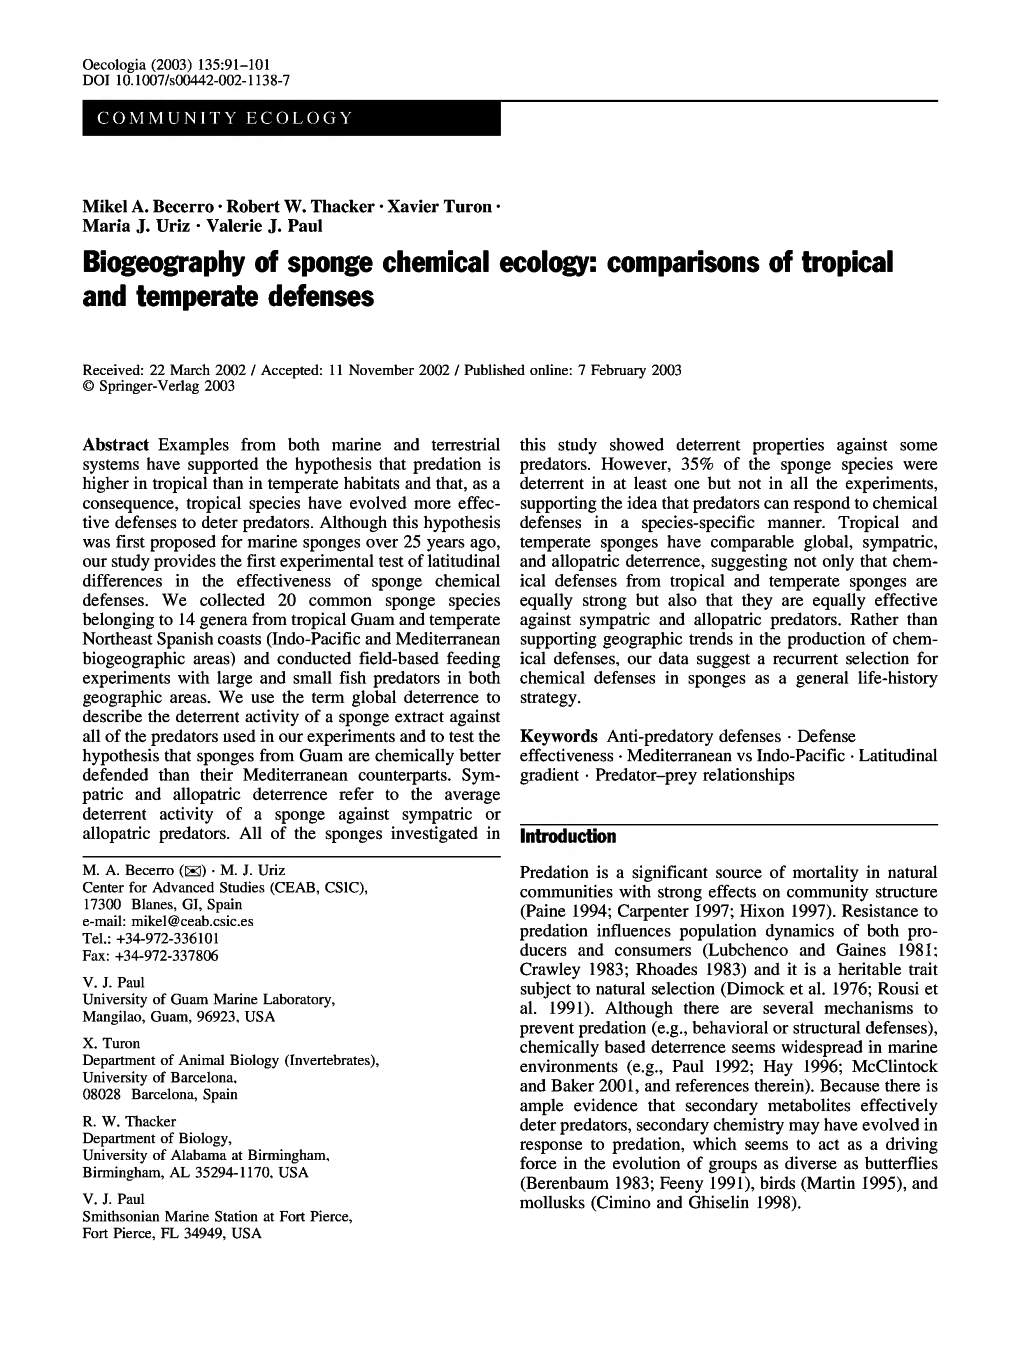 Biogeography of Sponge Chemical Ecology: Comparisons of Tropical and Temperate Defenses